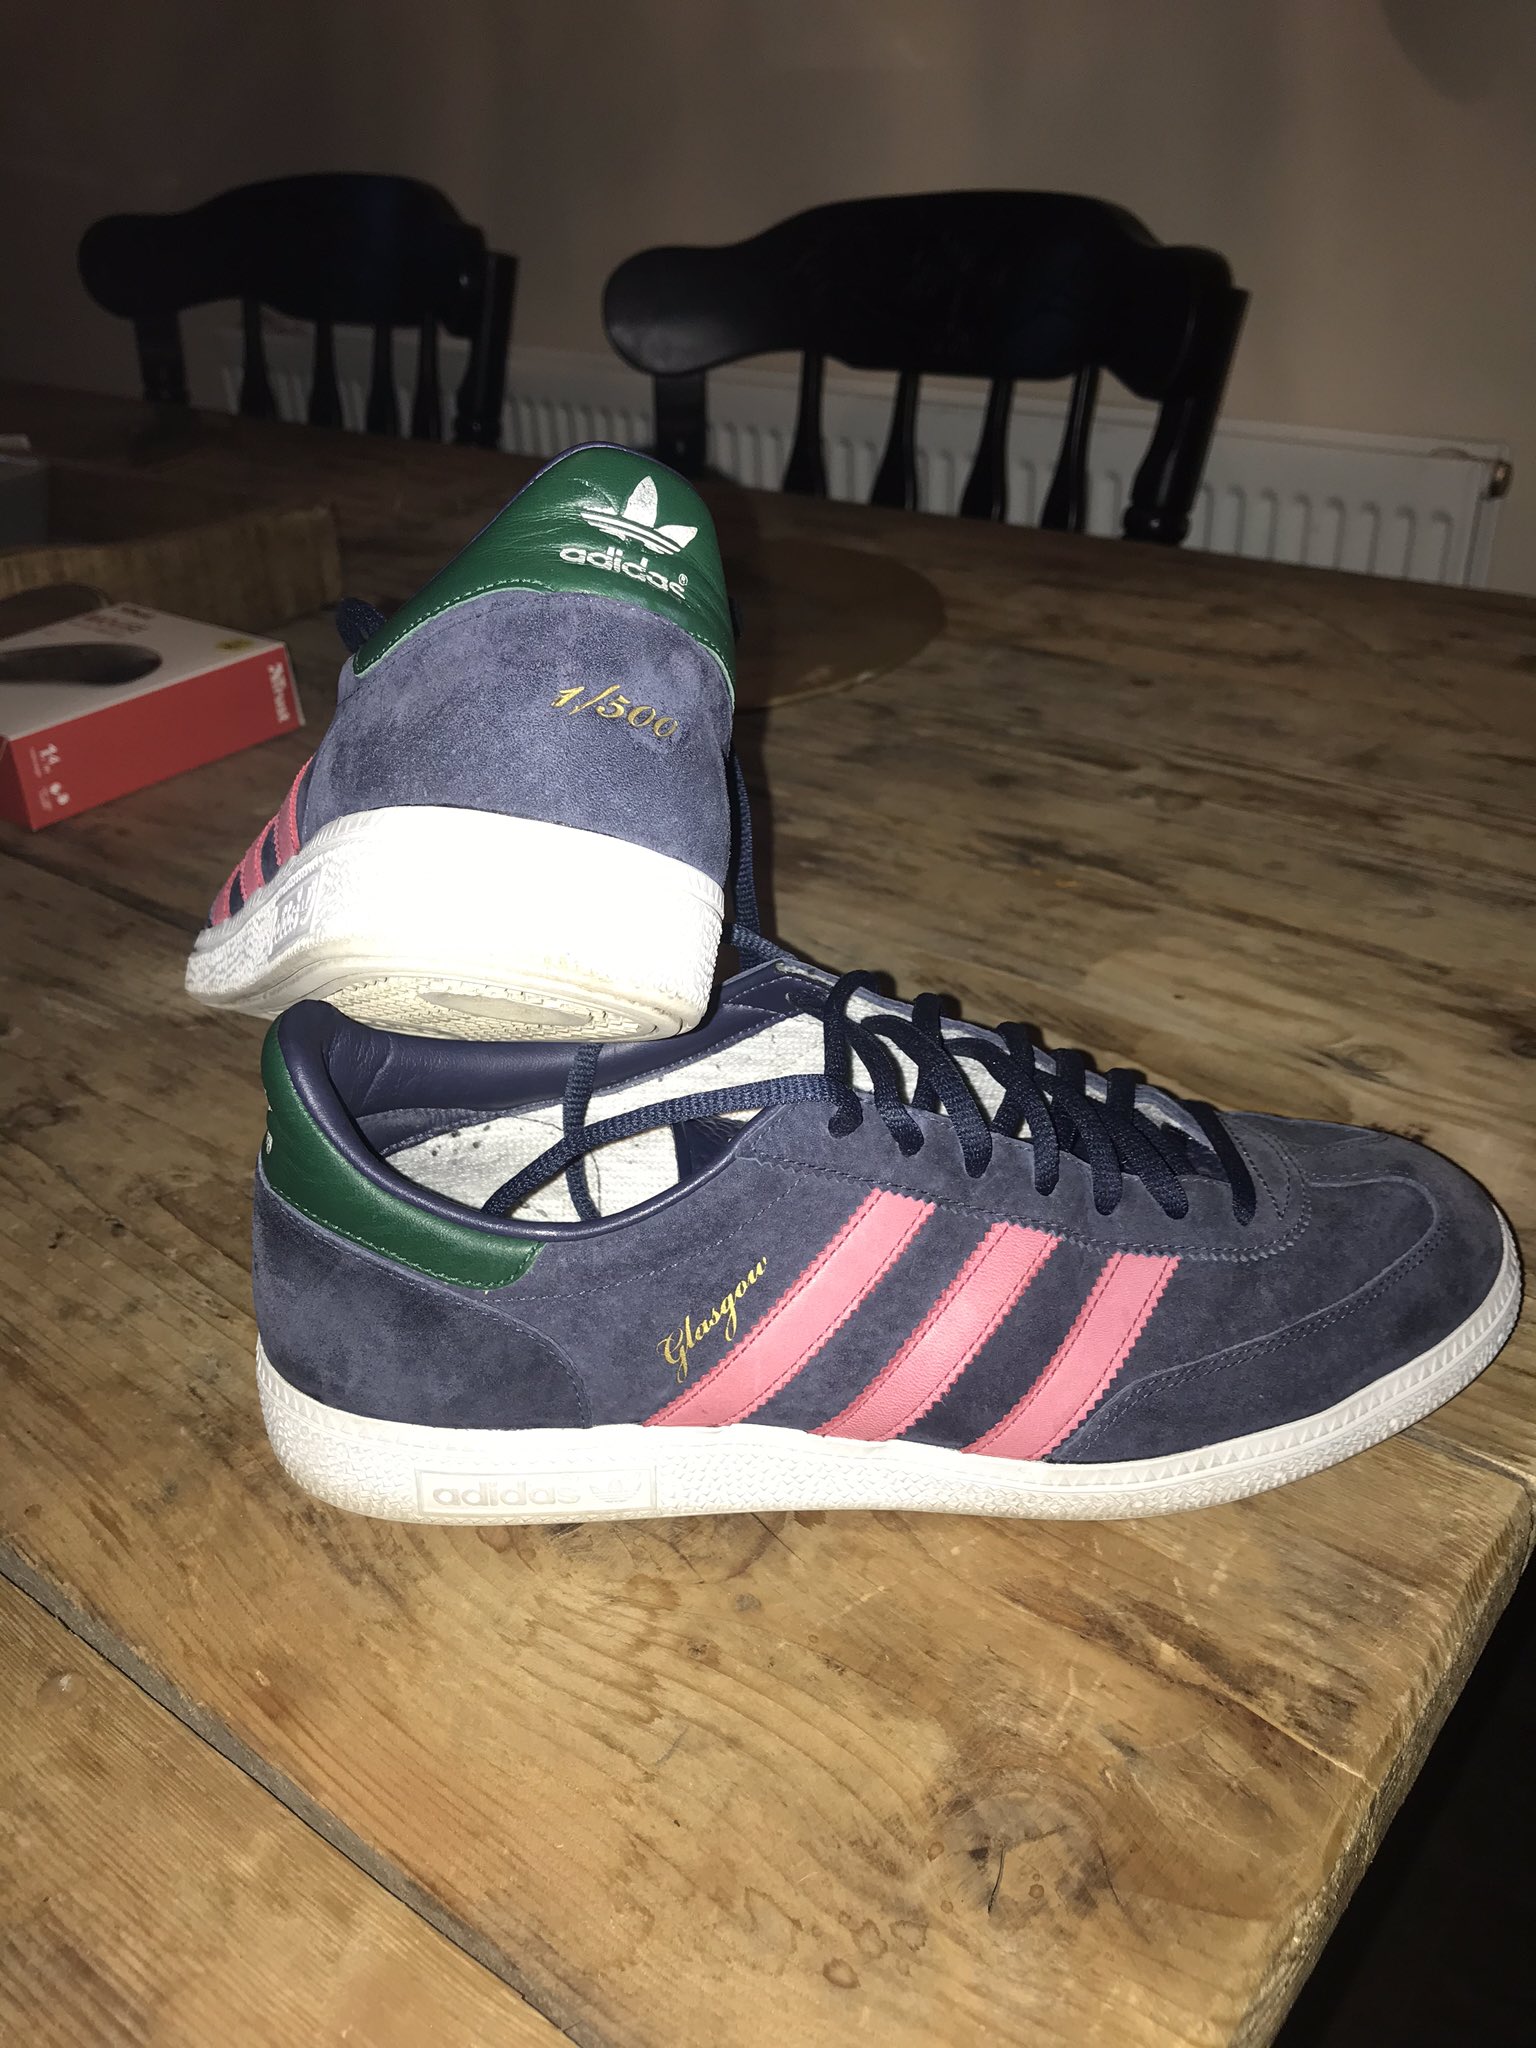 James Penty on Twitter: "The most underrated 1/500 pairs #Glasgow https://t.co/rfPyj1mVPS" / Twitter